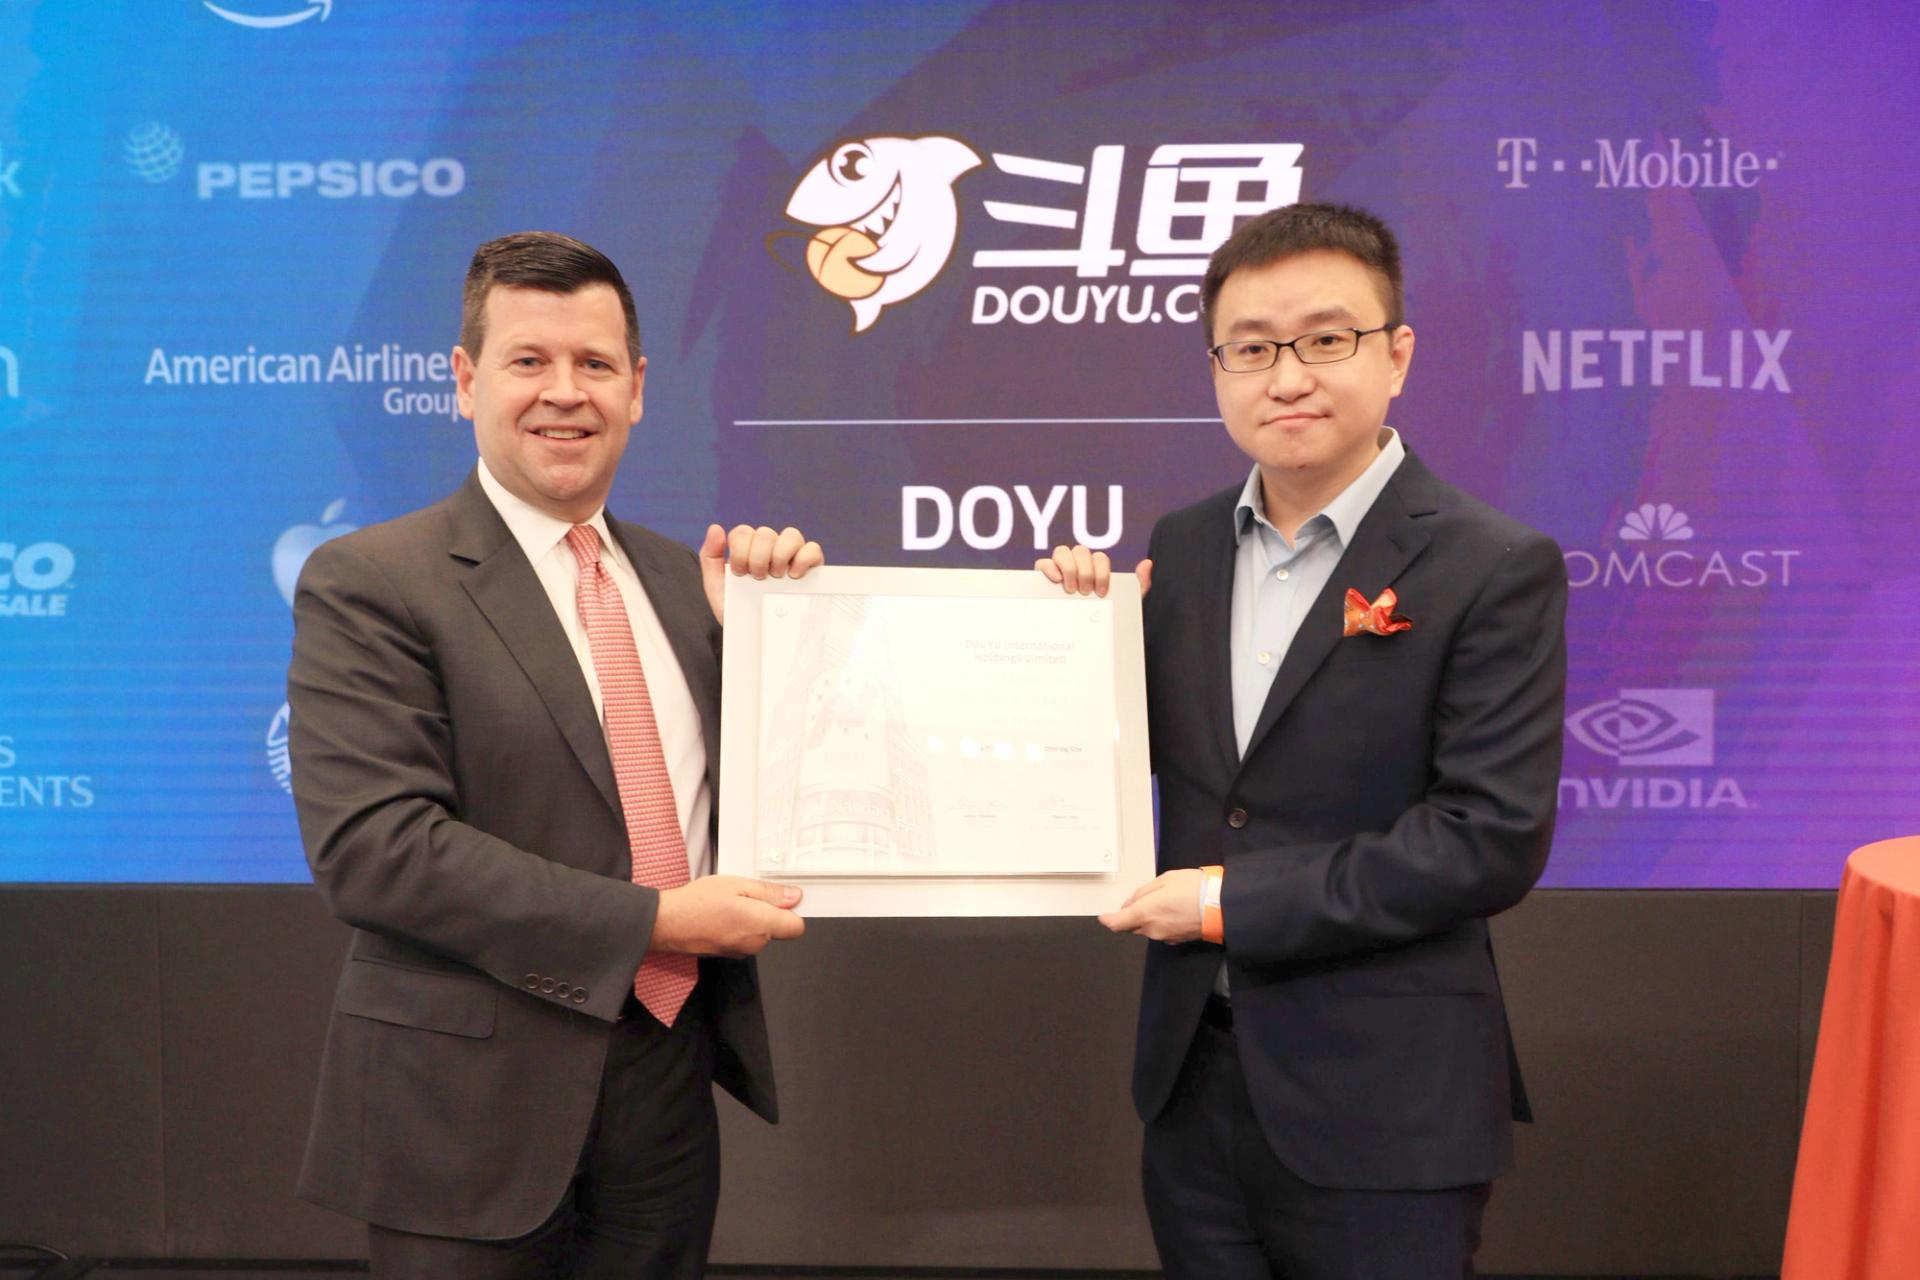 In this handout image, Chen Shaojie, right, founder and CEO of DouYu International Holdings Limited, poses on the Nasdaq stock exchange as DouYu International Holdings LTD initial public offering debuts in New York, USA, 17 July 2019. Chinese video-game live-streaming platform DouYu International Holdings Limited rang the Nasdaq Stock Market opening bell on Wednesday in celebration of its initial public offering (IPO). The company, trading under the ticker symbol of "DOYU," priced its initial public offering of 67,387,110 American depositary shares (ADSs) at $11.50 per ADS for a total offering size of approximately $775 million, assuming the underwriters their over-allotment option